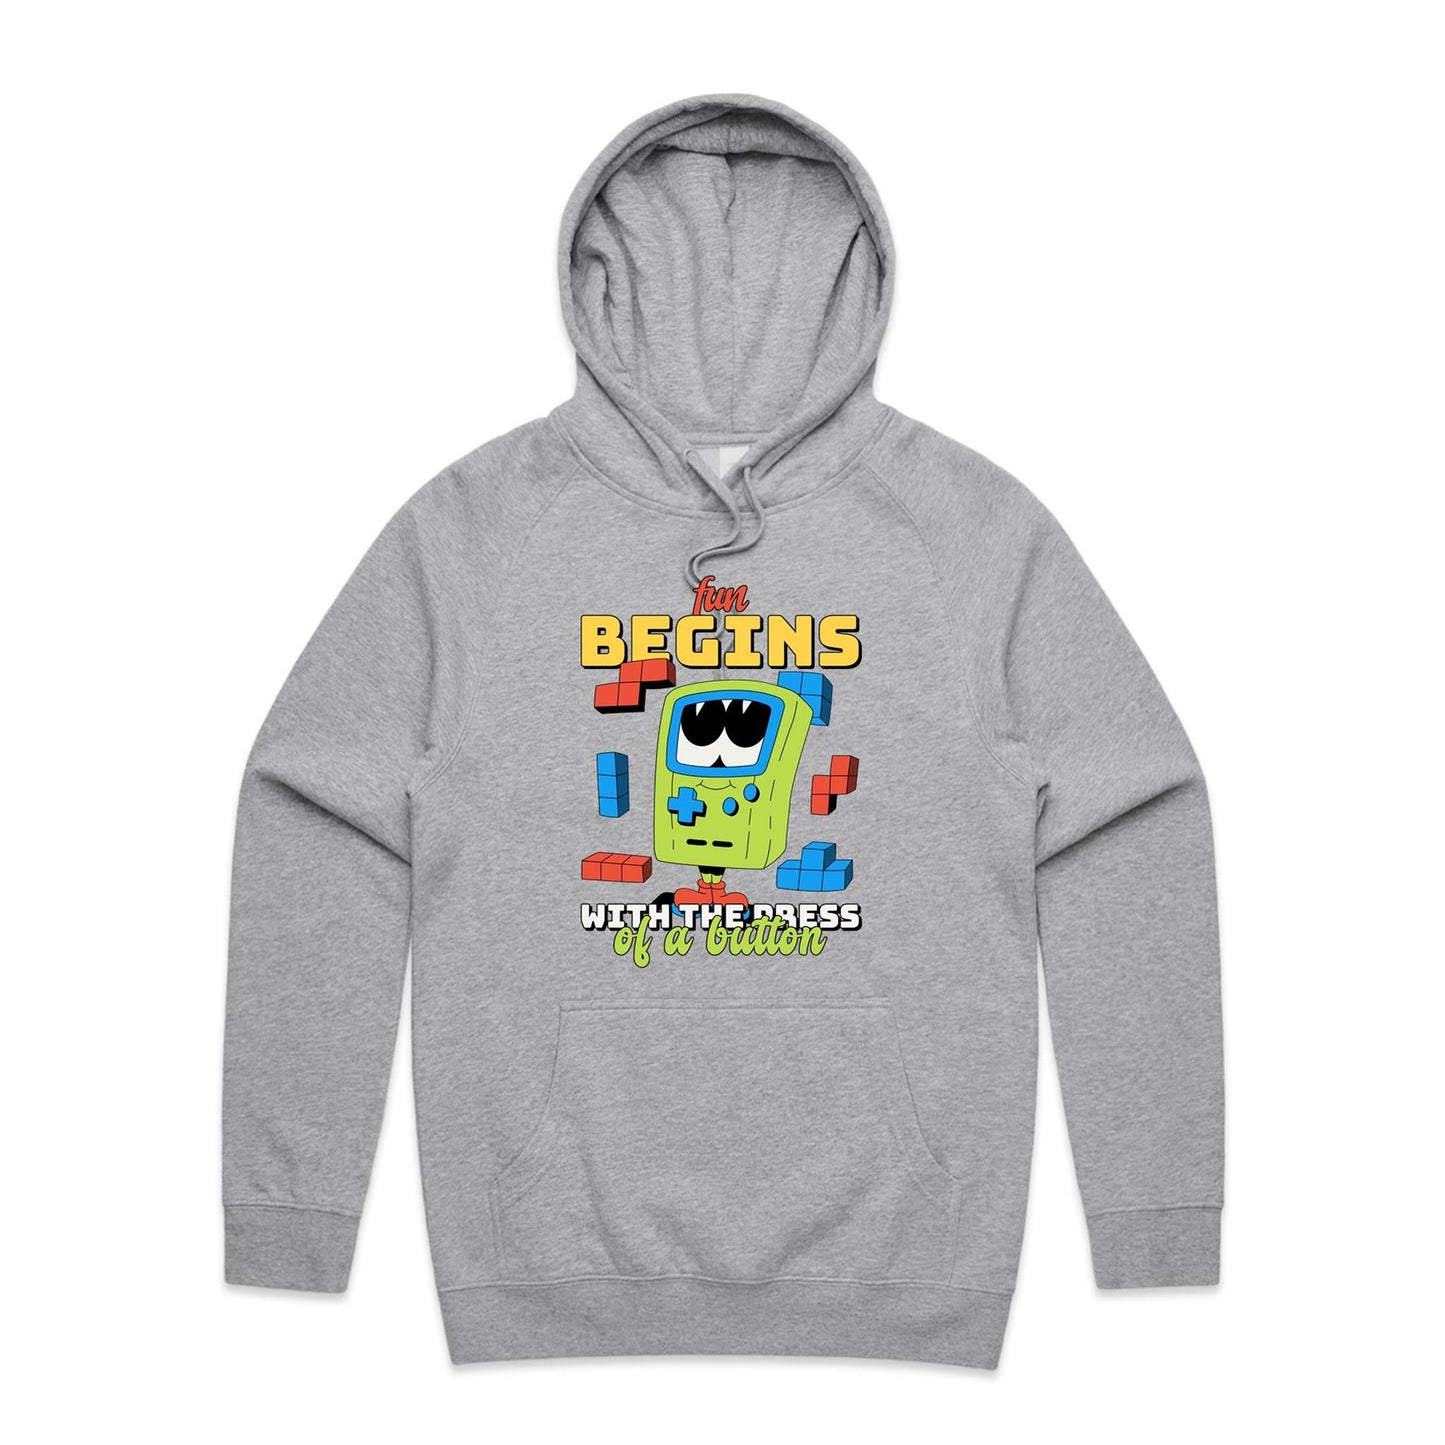 Fun Begins With The Press Of A Button - Supply Hood Grey Marle Mens Supply Hoodie Games